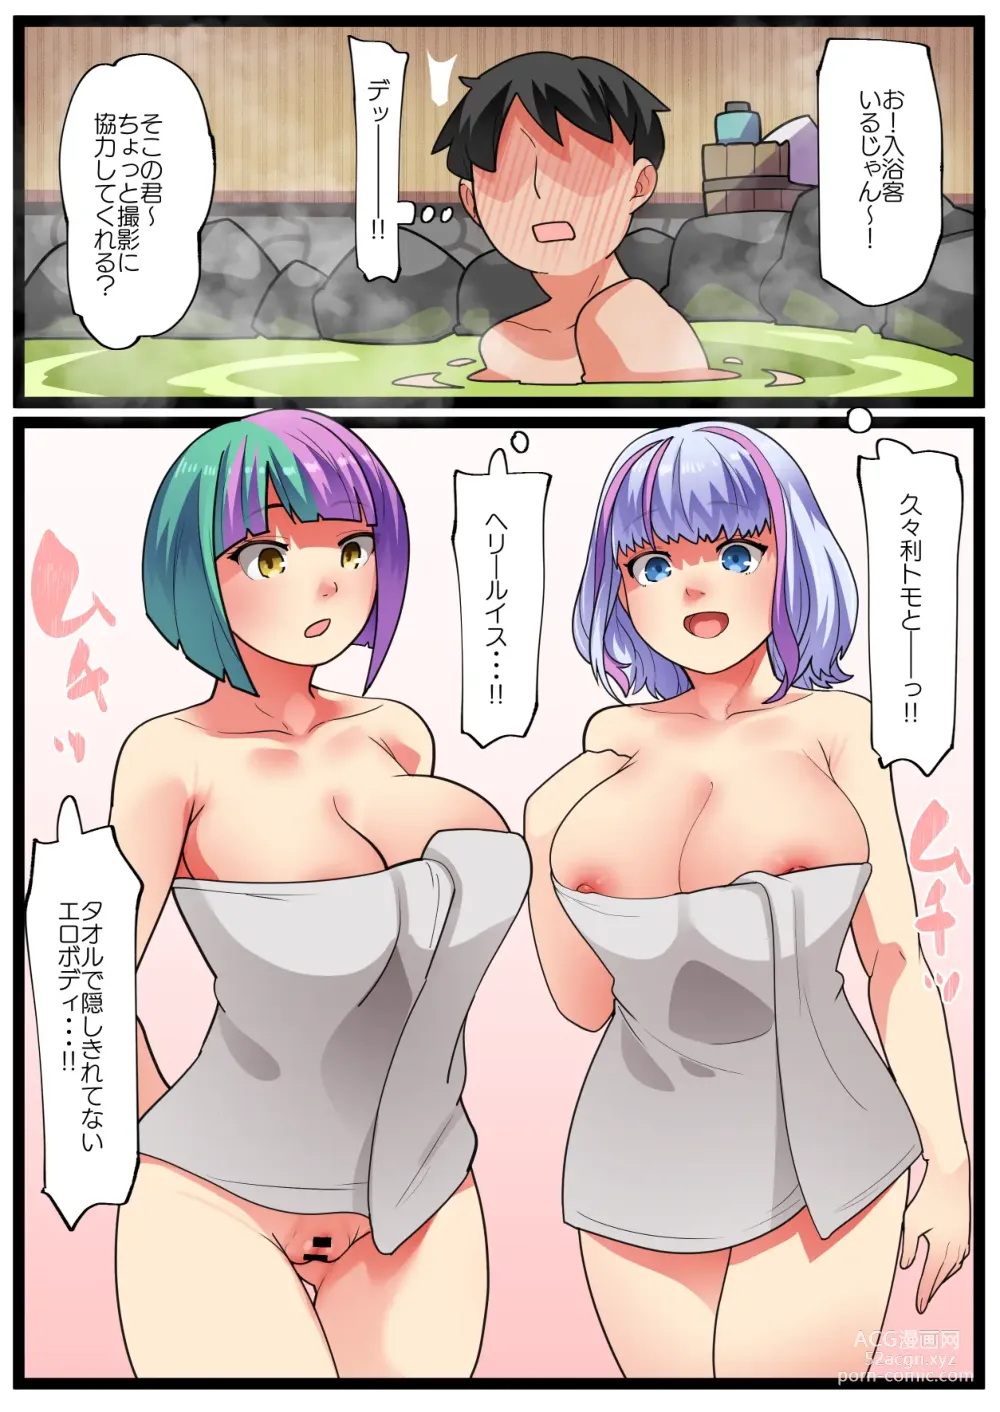 Page 1 of doujinshi pixiv Request